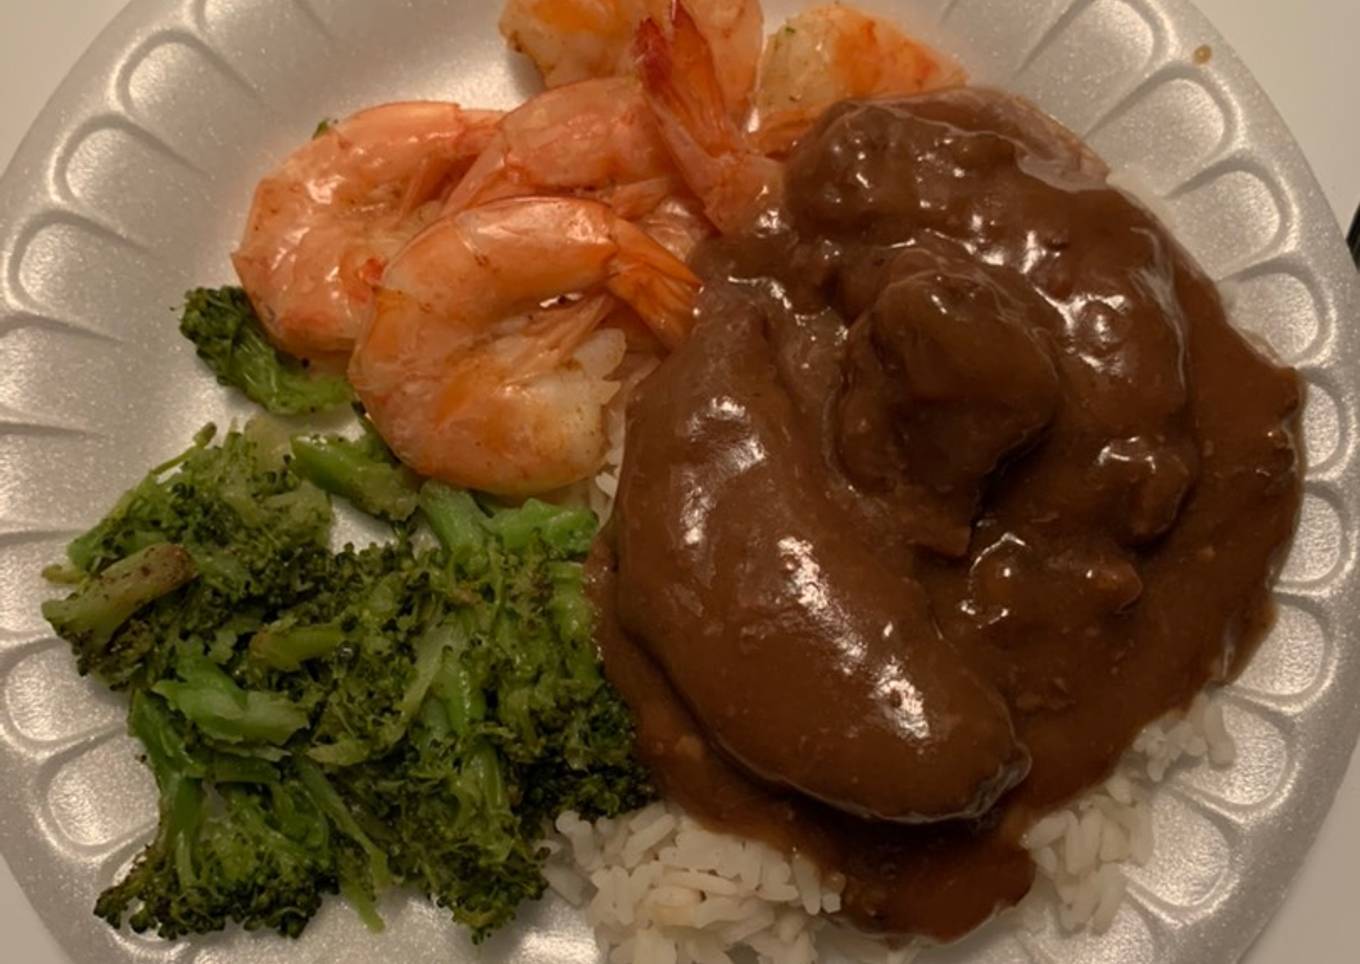 Beef,shrimp and broccoli special